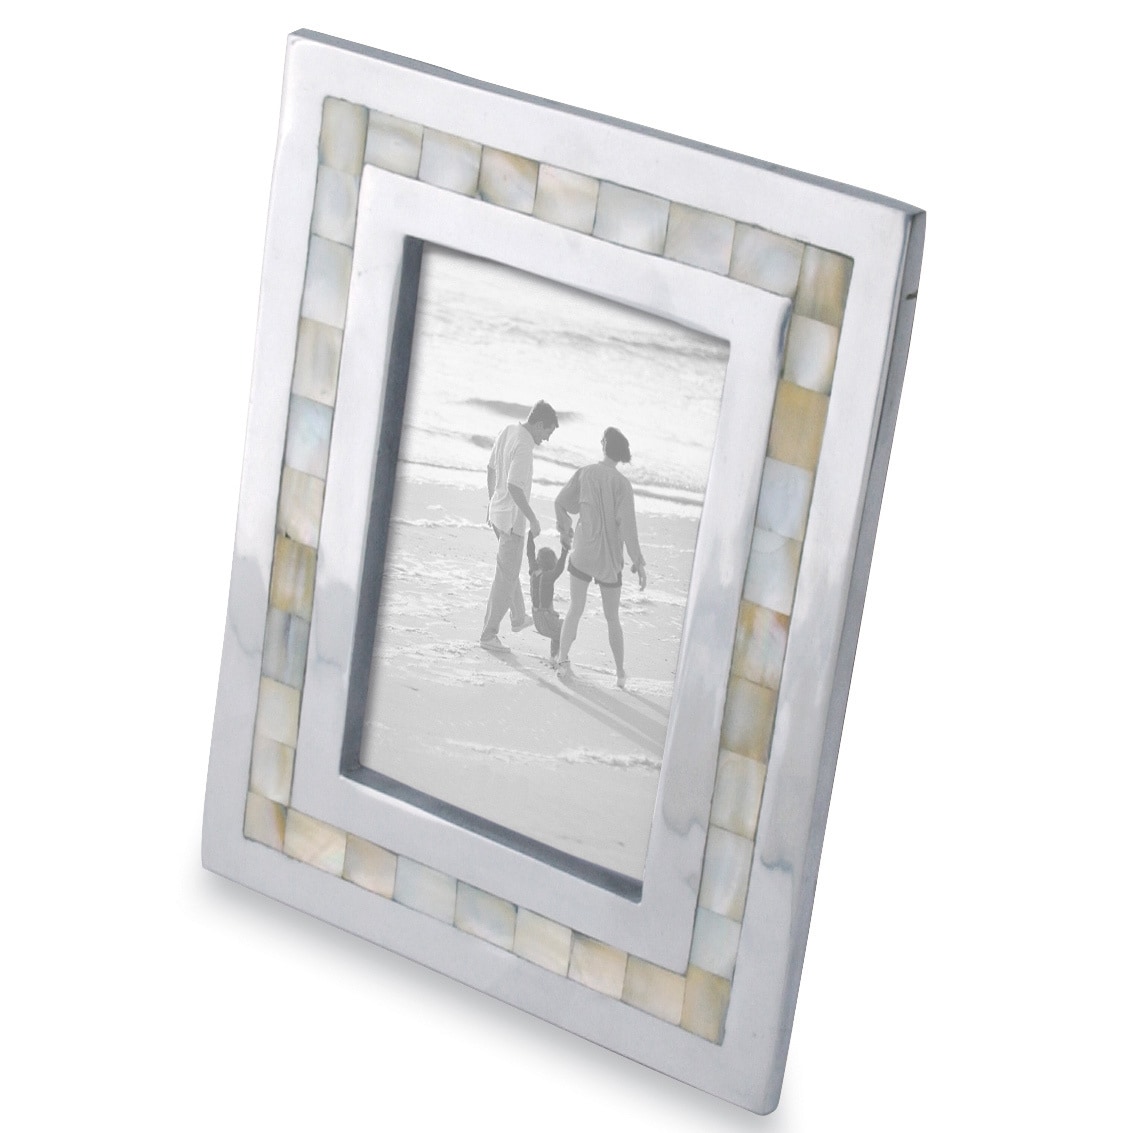 Kindwer Mother Of Pearl Inlayed Aluminum Frame (5x7) Silver Size 5x7